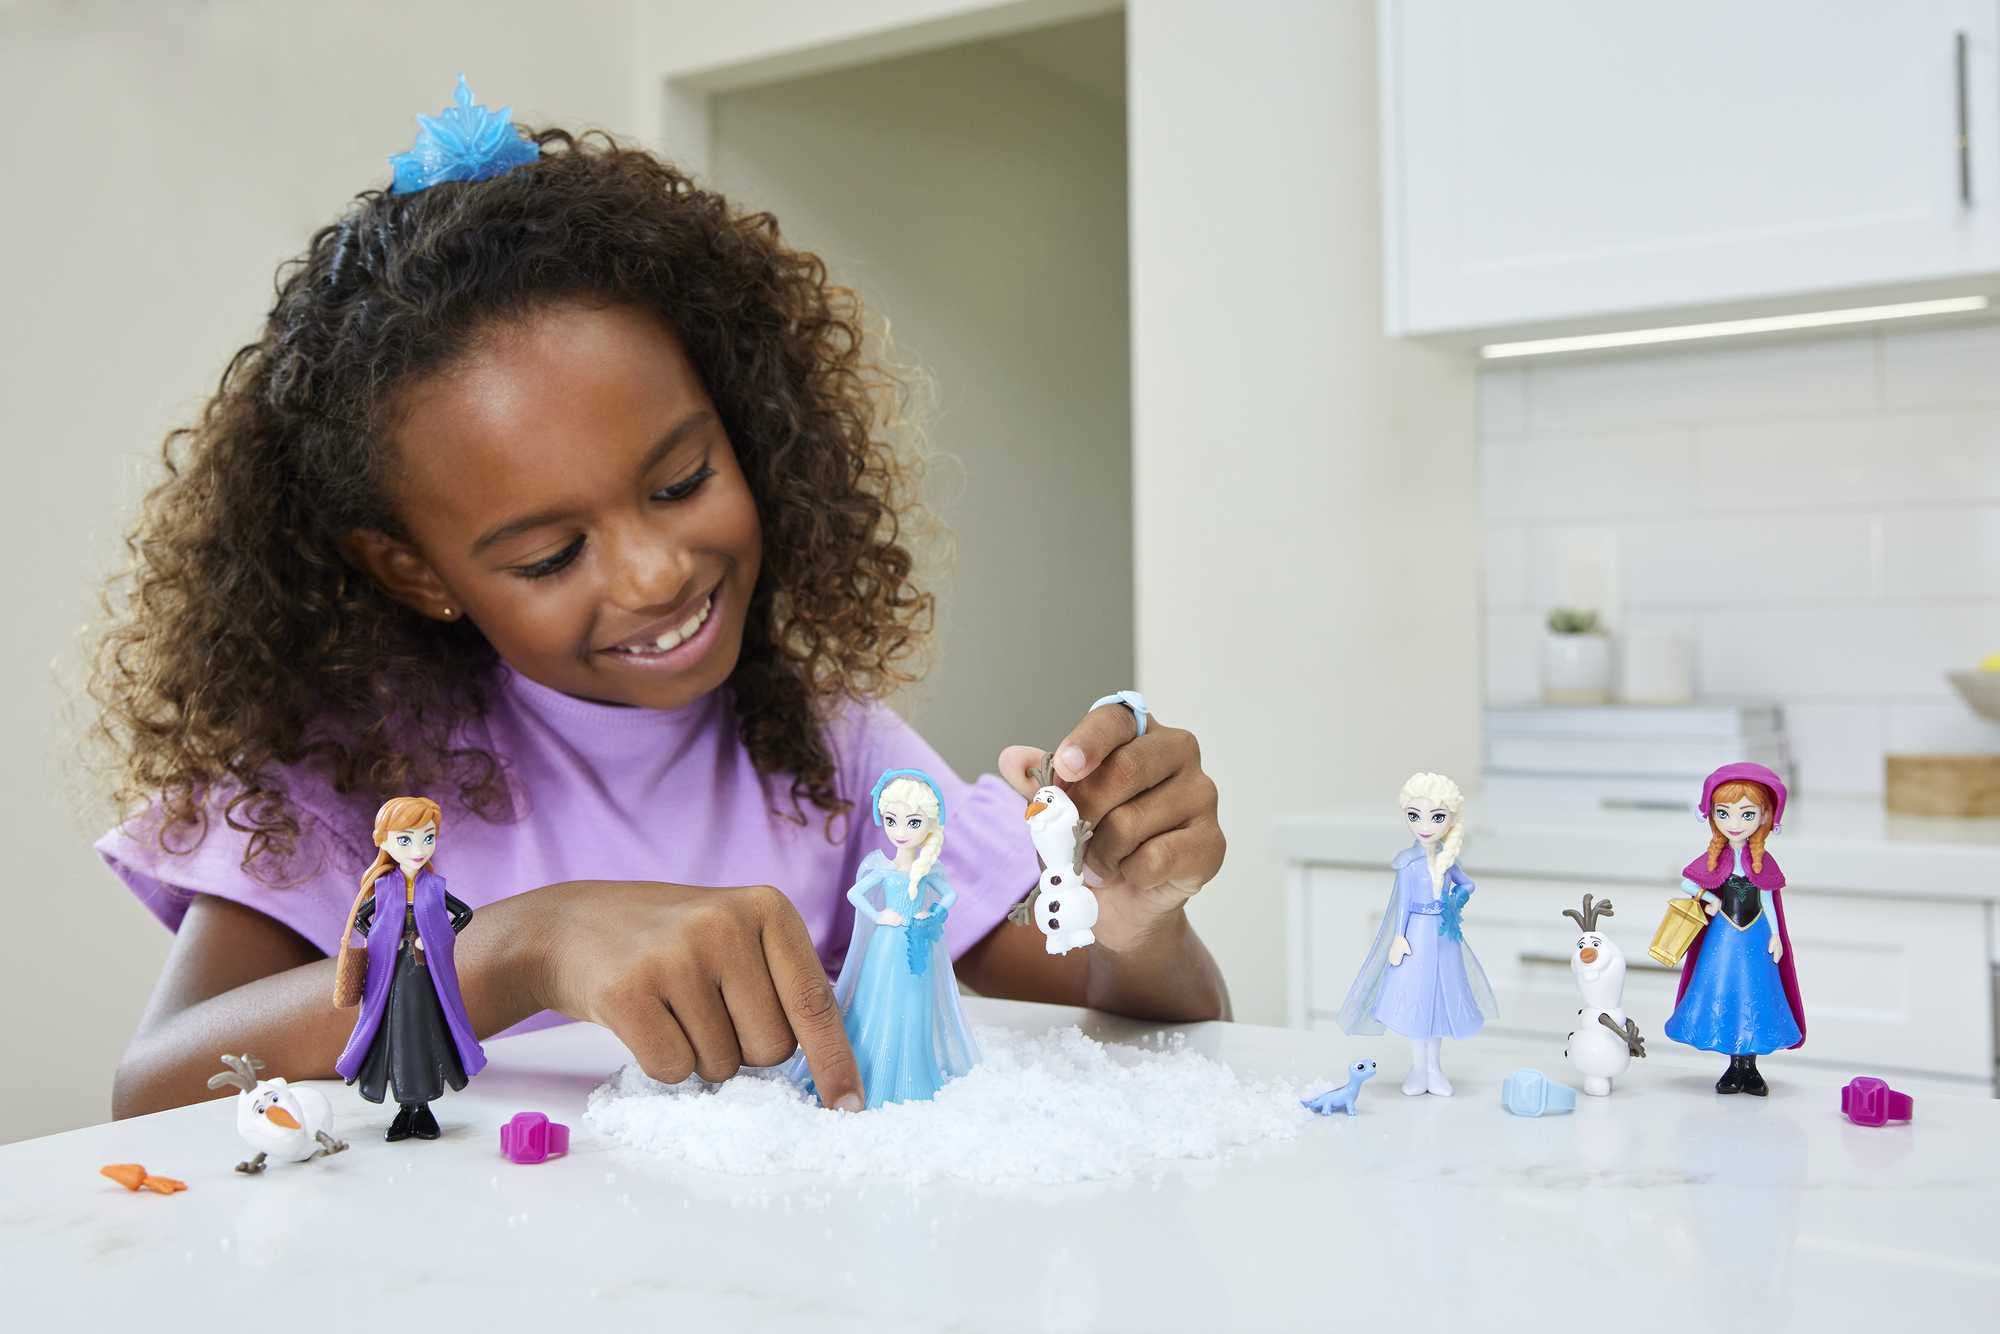 Disney Frozen Snow Color Reveal Small Doll & Accessories, 6 Surprises Include Character Figure Inspired by Disney Movies